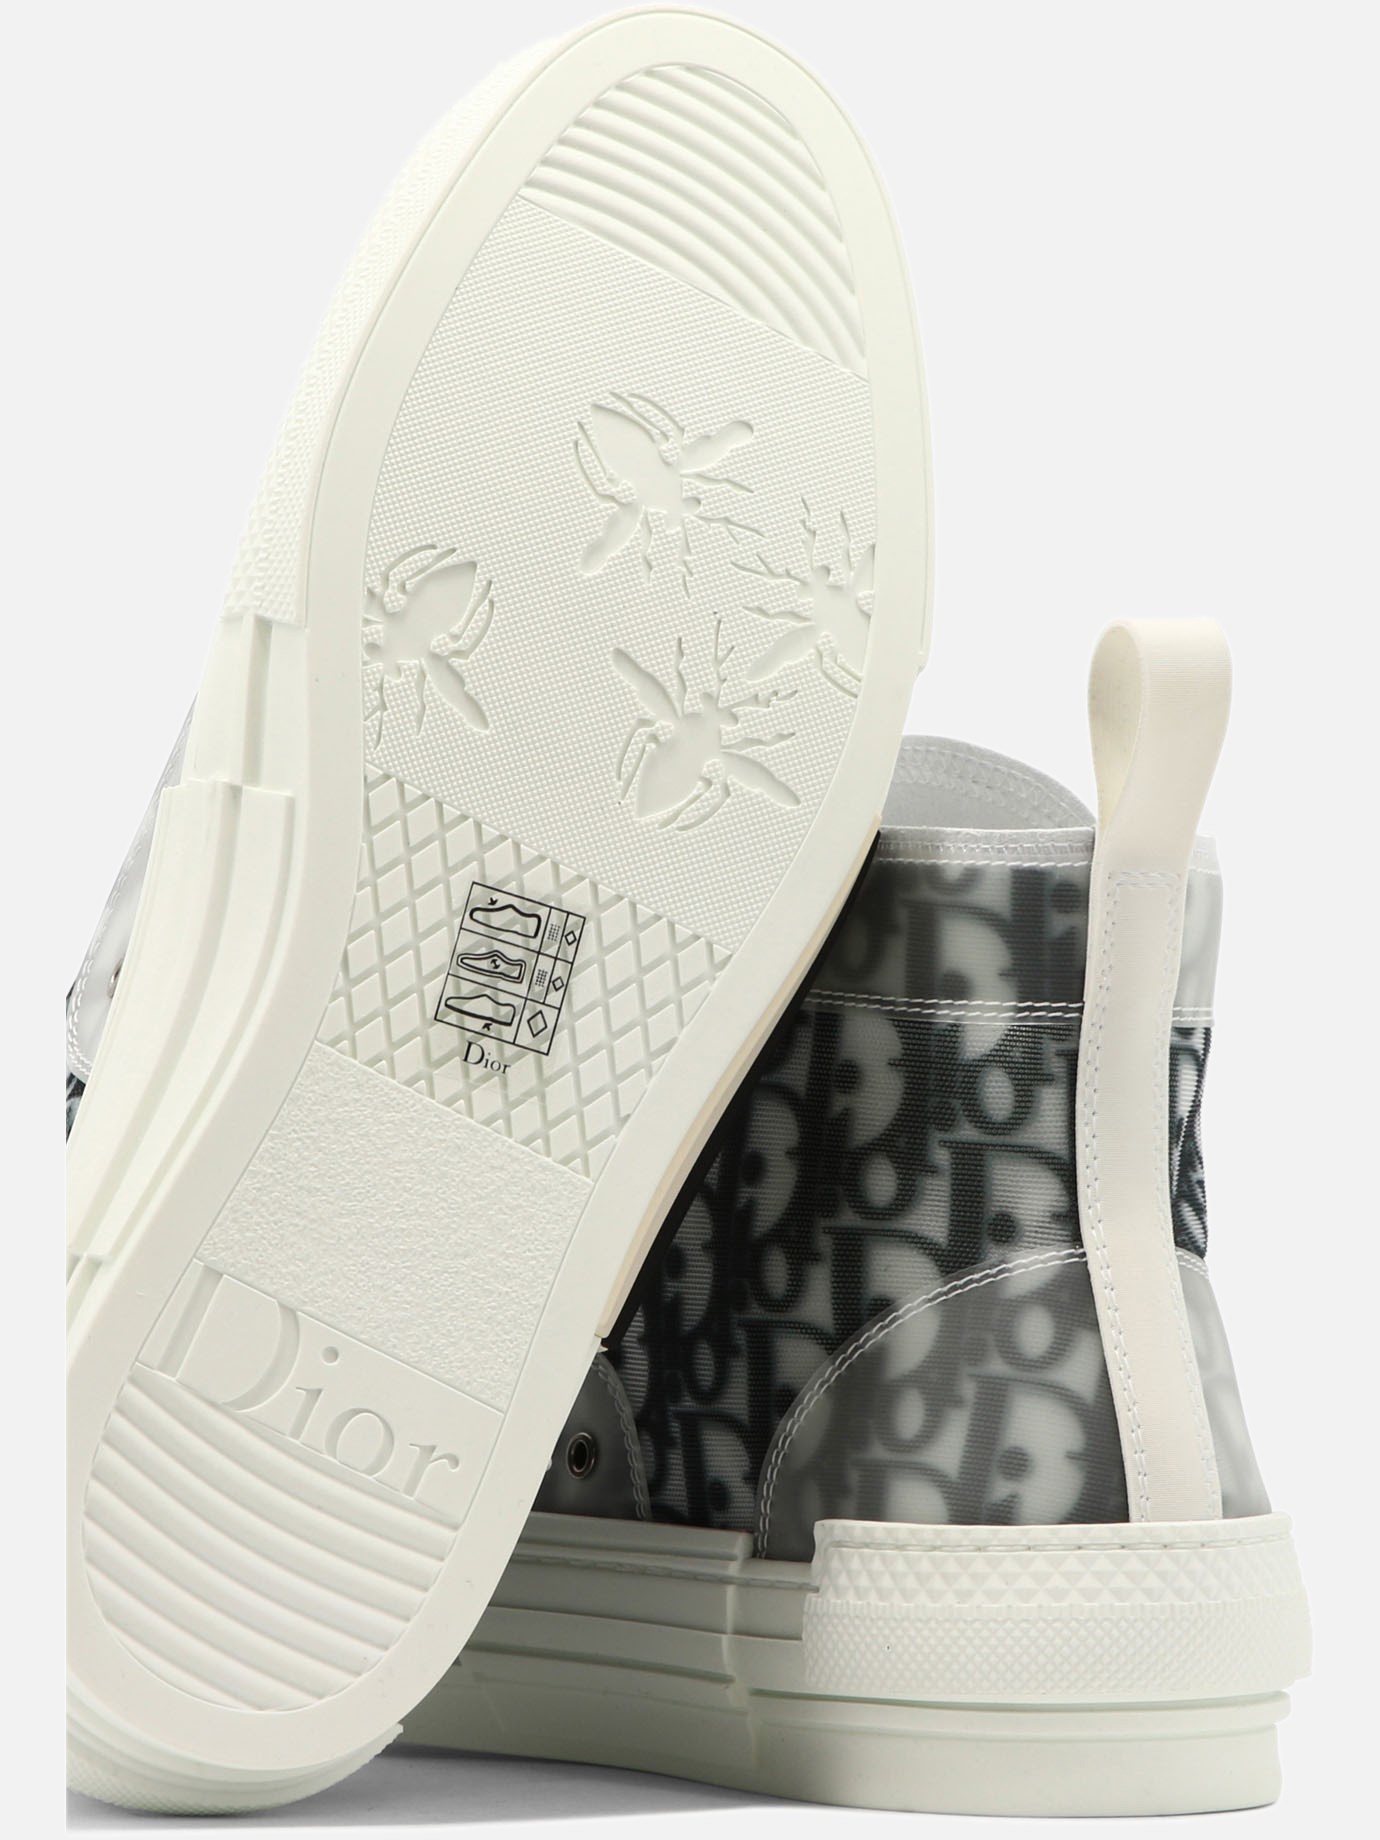  B23  sneakers by Dior